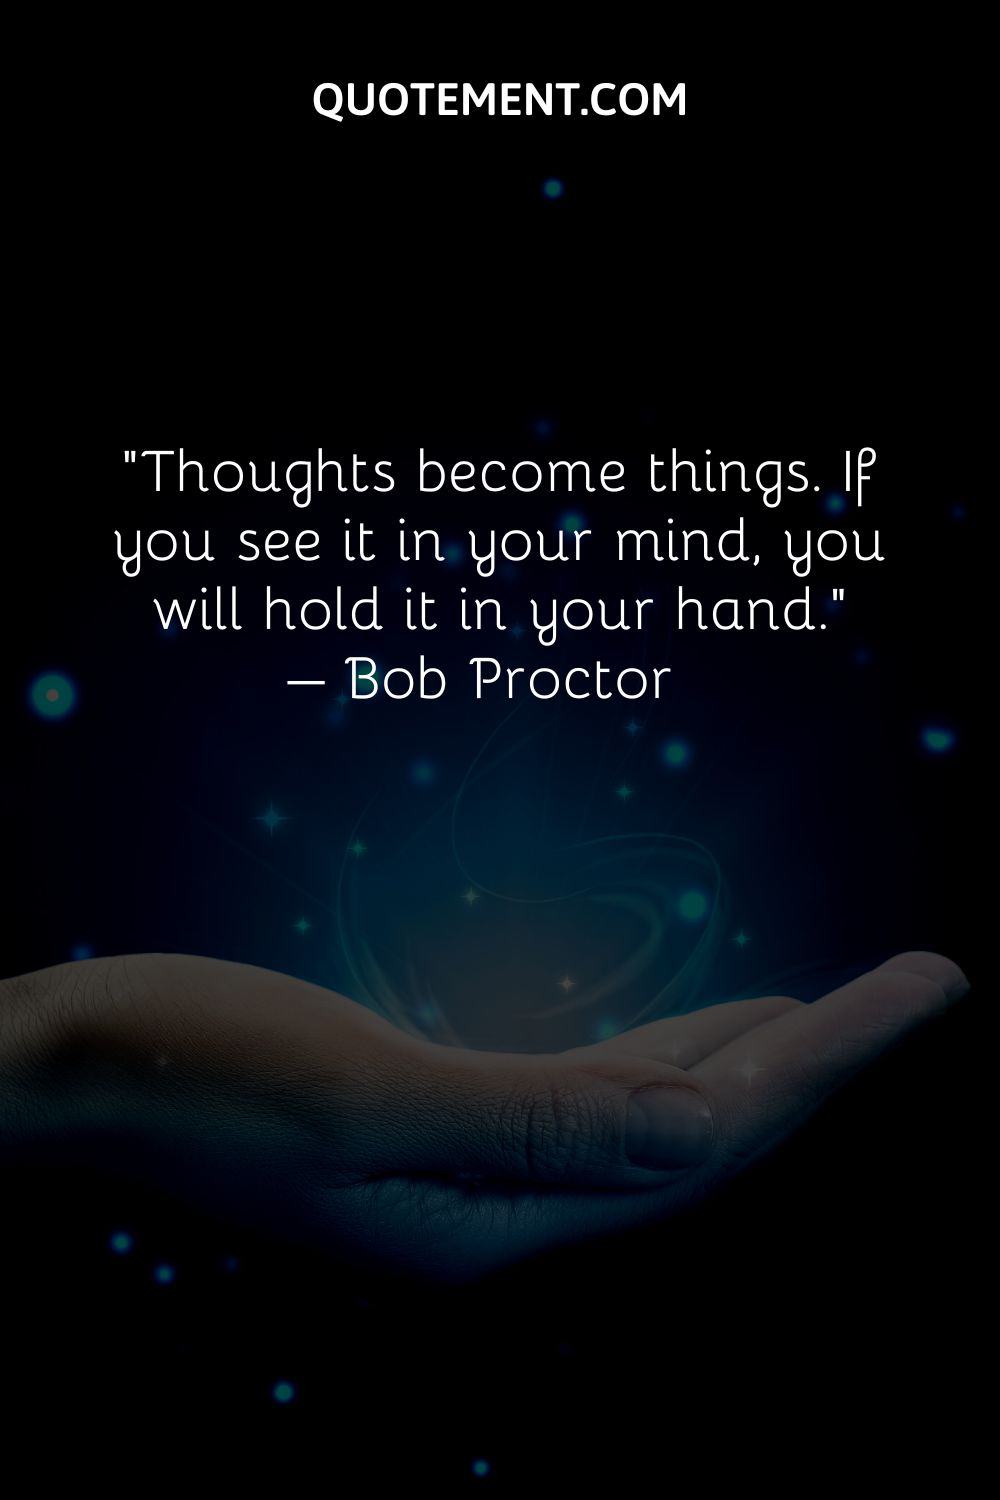 Thoughts become things